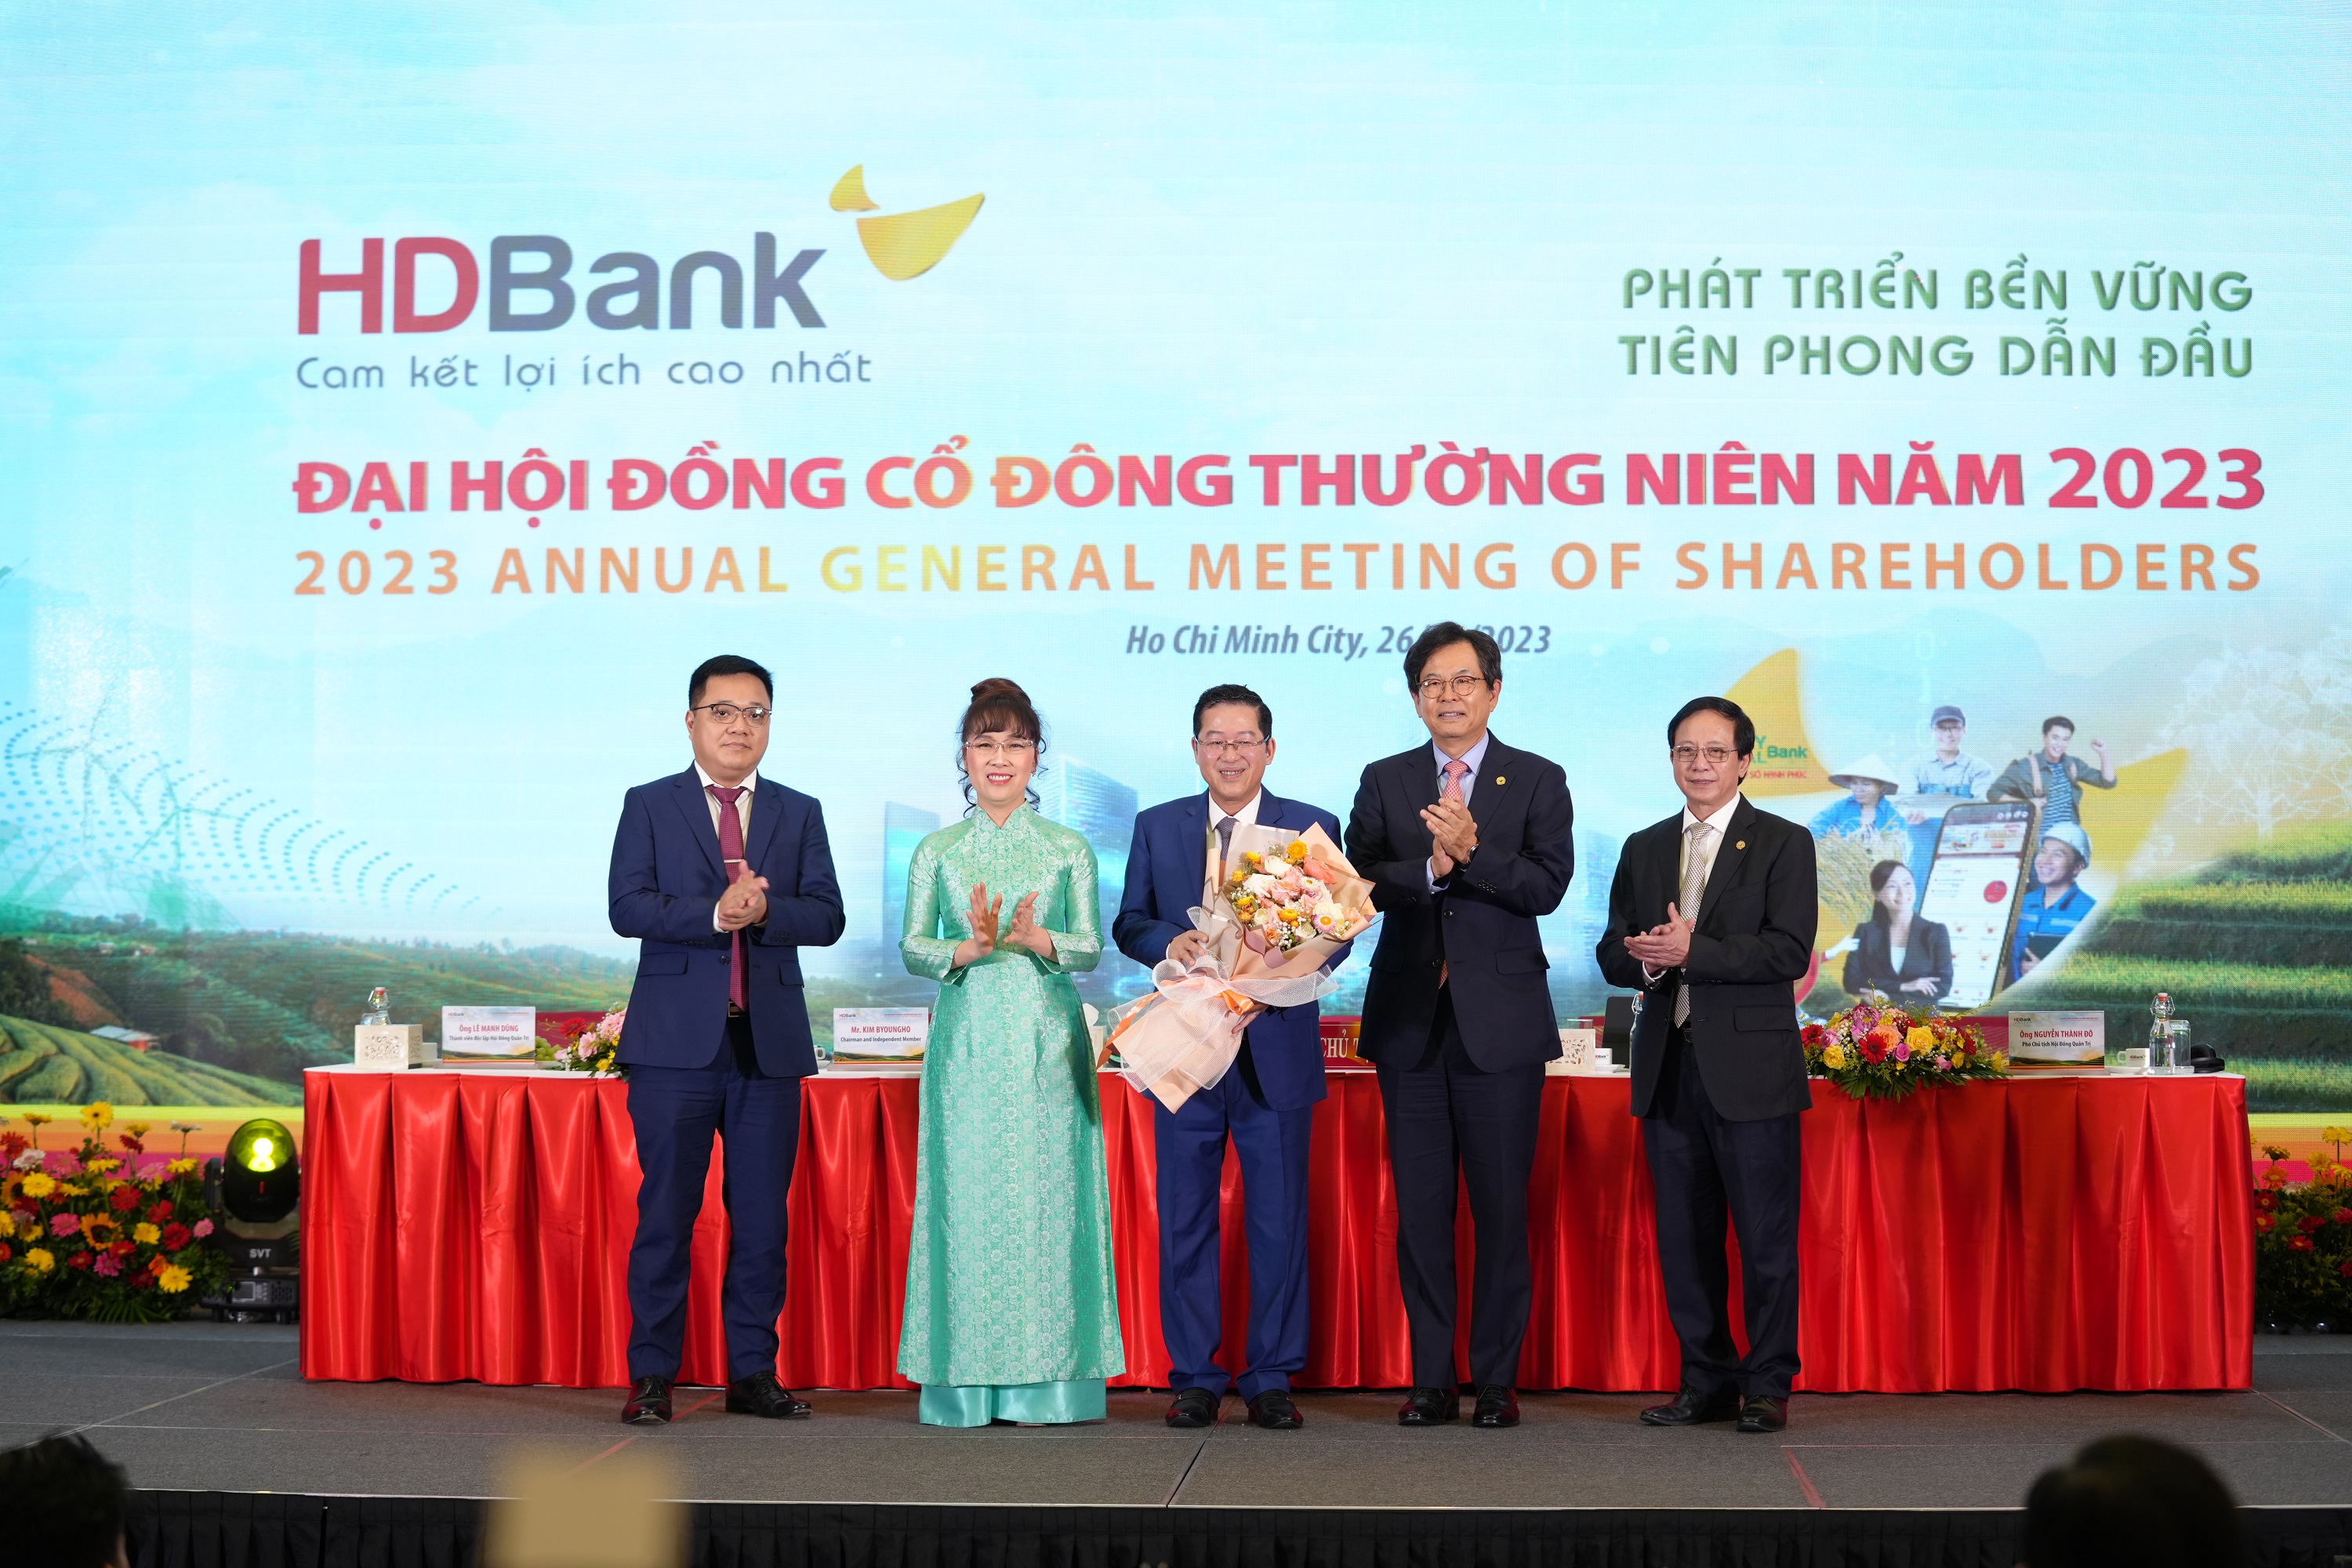 From left to right: Mr. Le Manh Dung, Independent member of HDBank